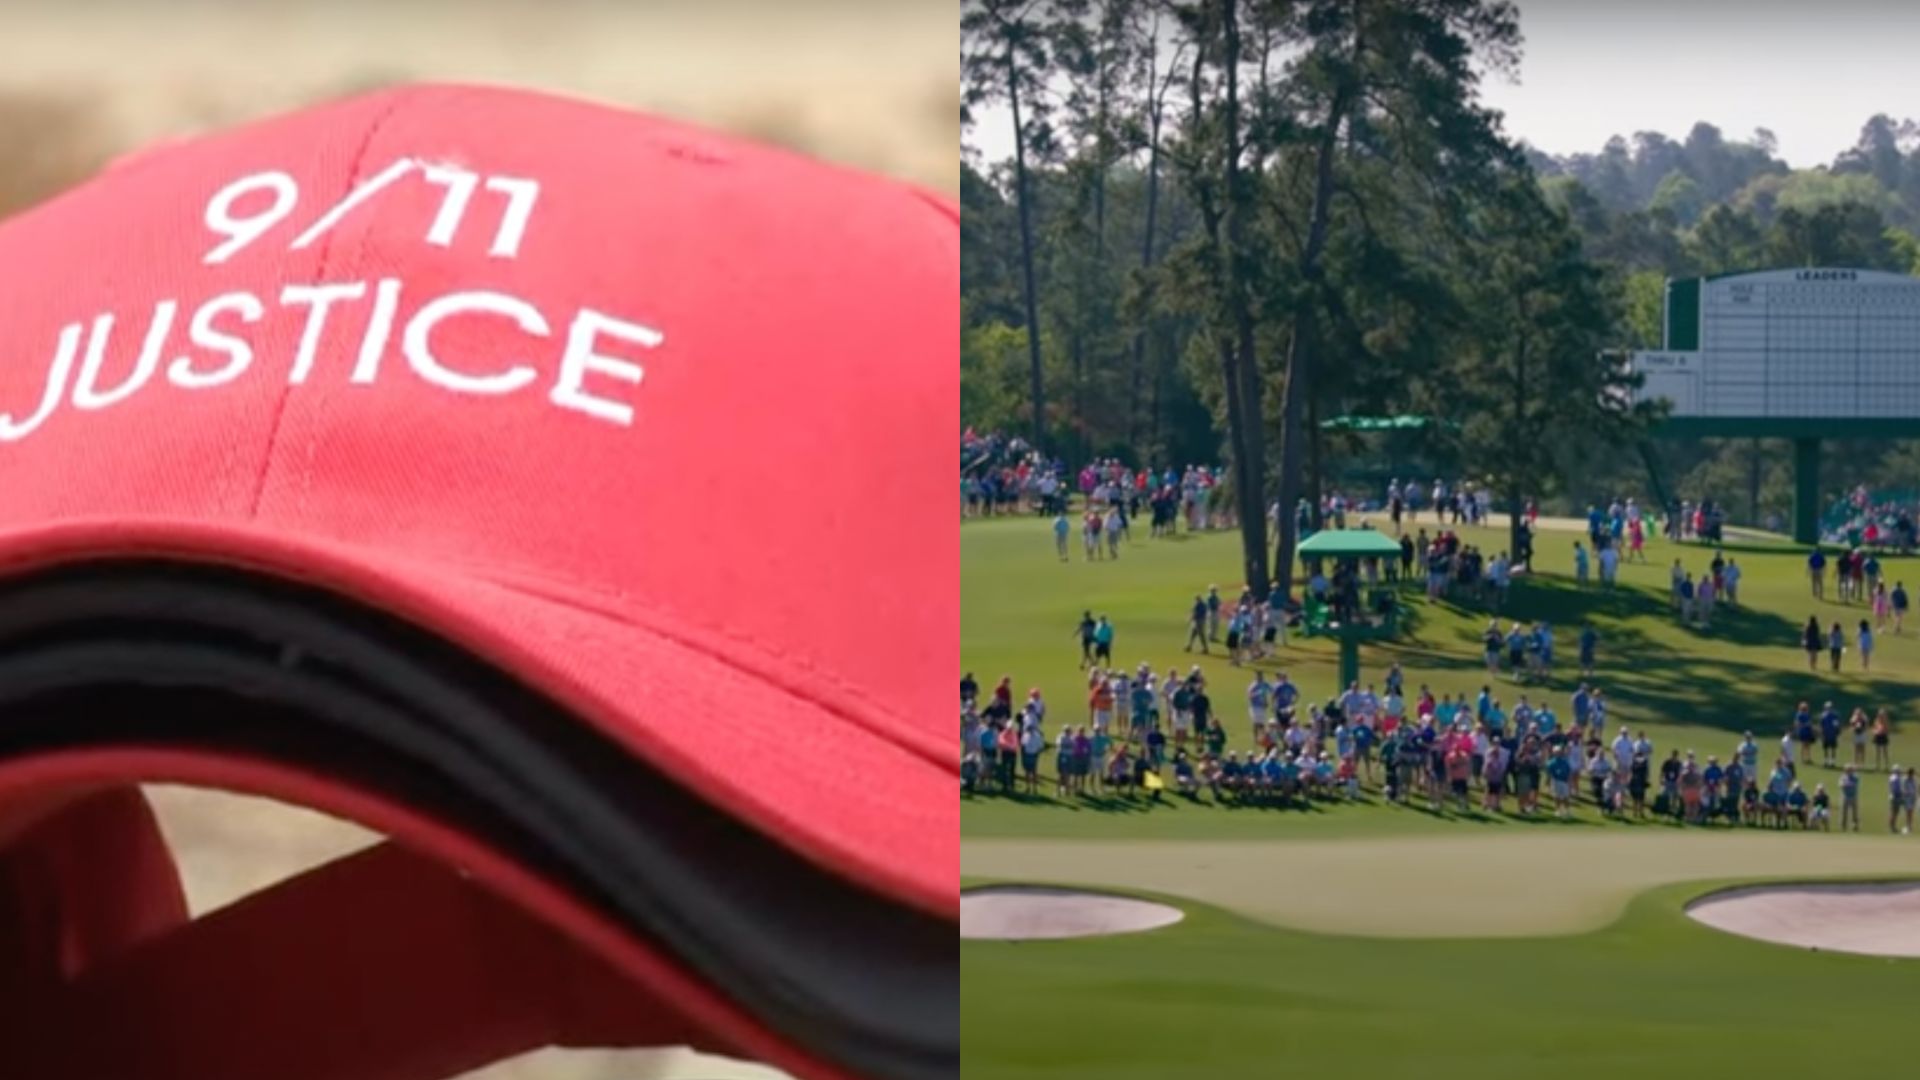 9/11 Families United Organization Threatens To Protest Golf’s Masters Championship After LIV Golfers Allowed To Compete